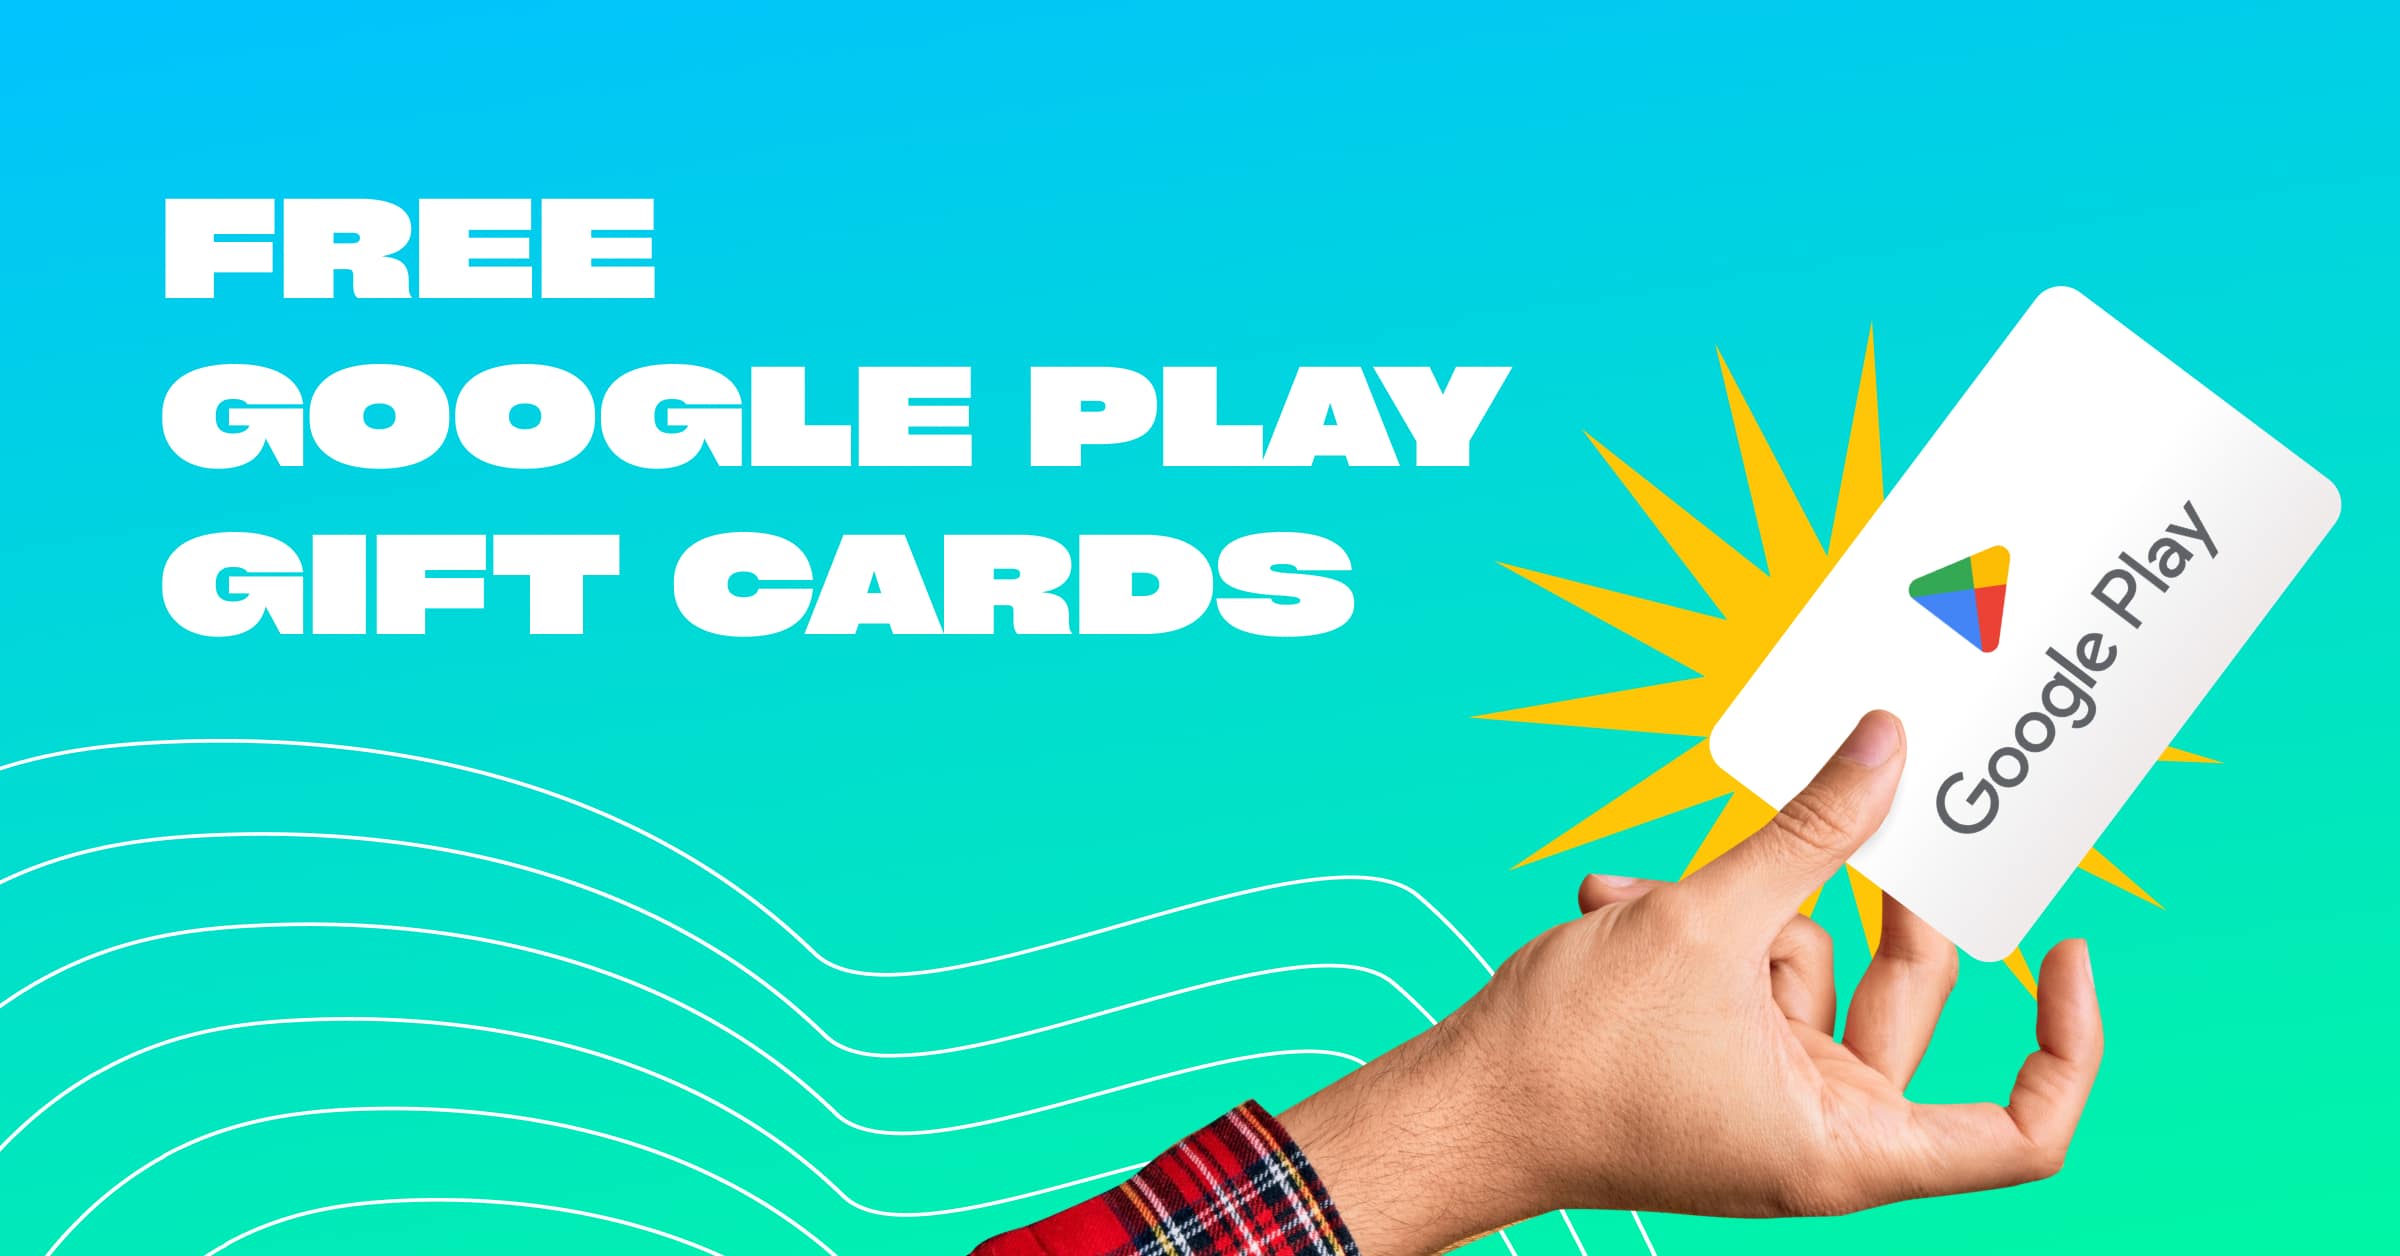 free google play gift cards image 1_1